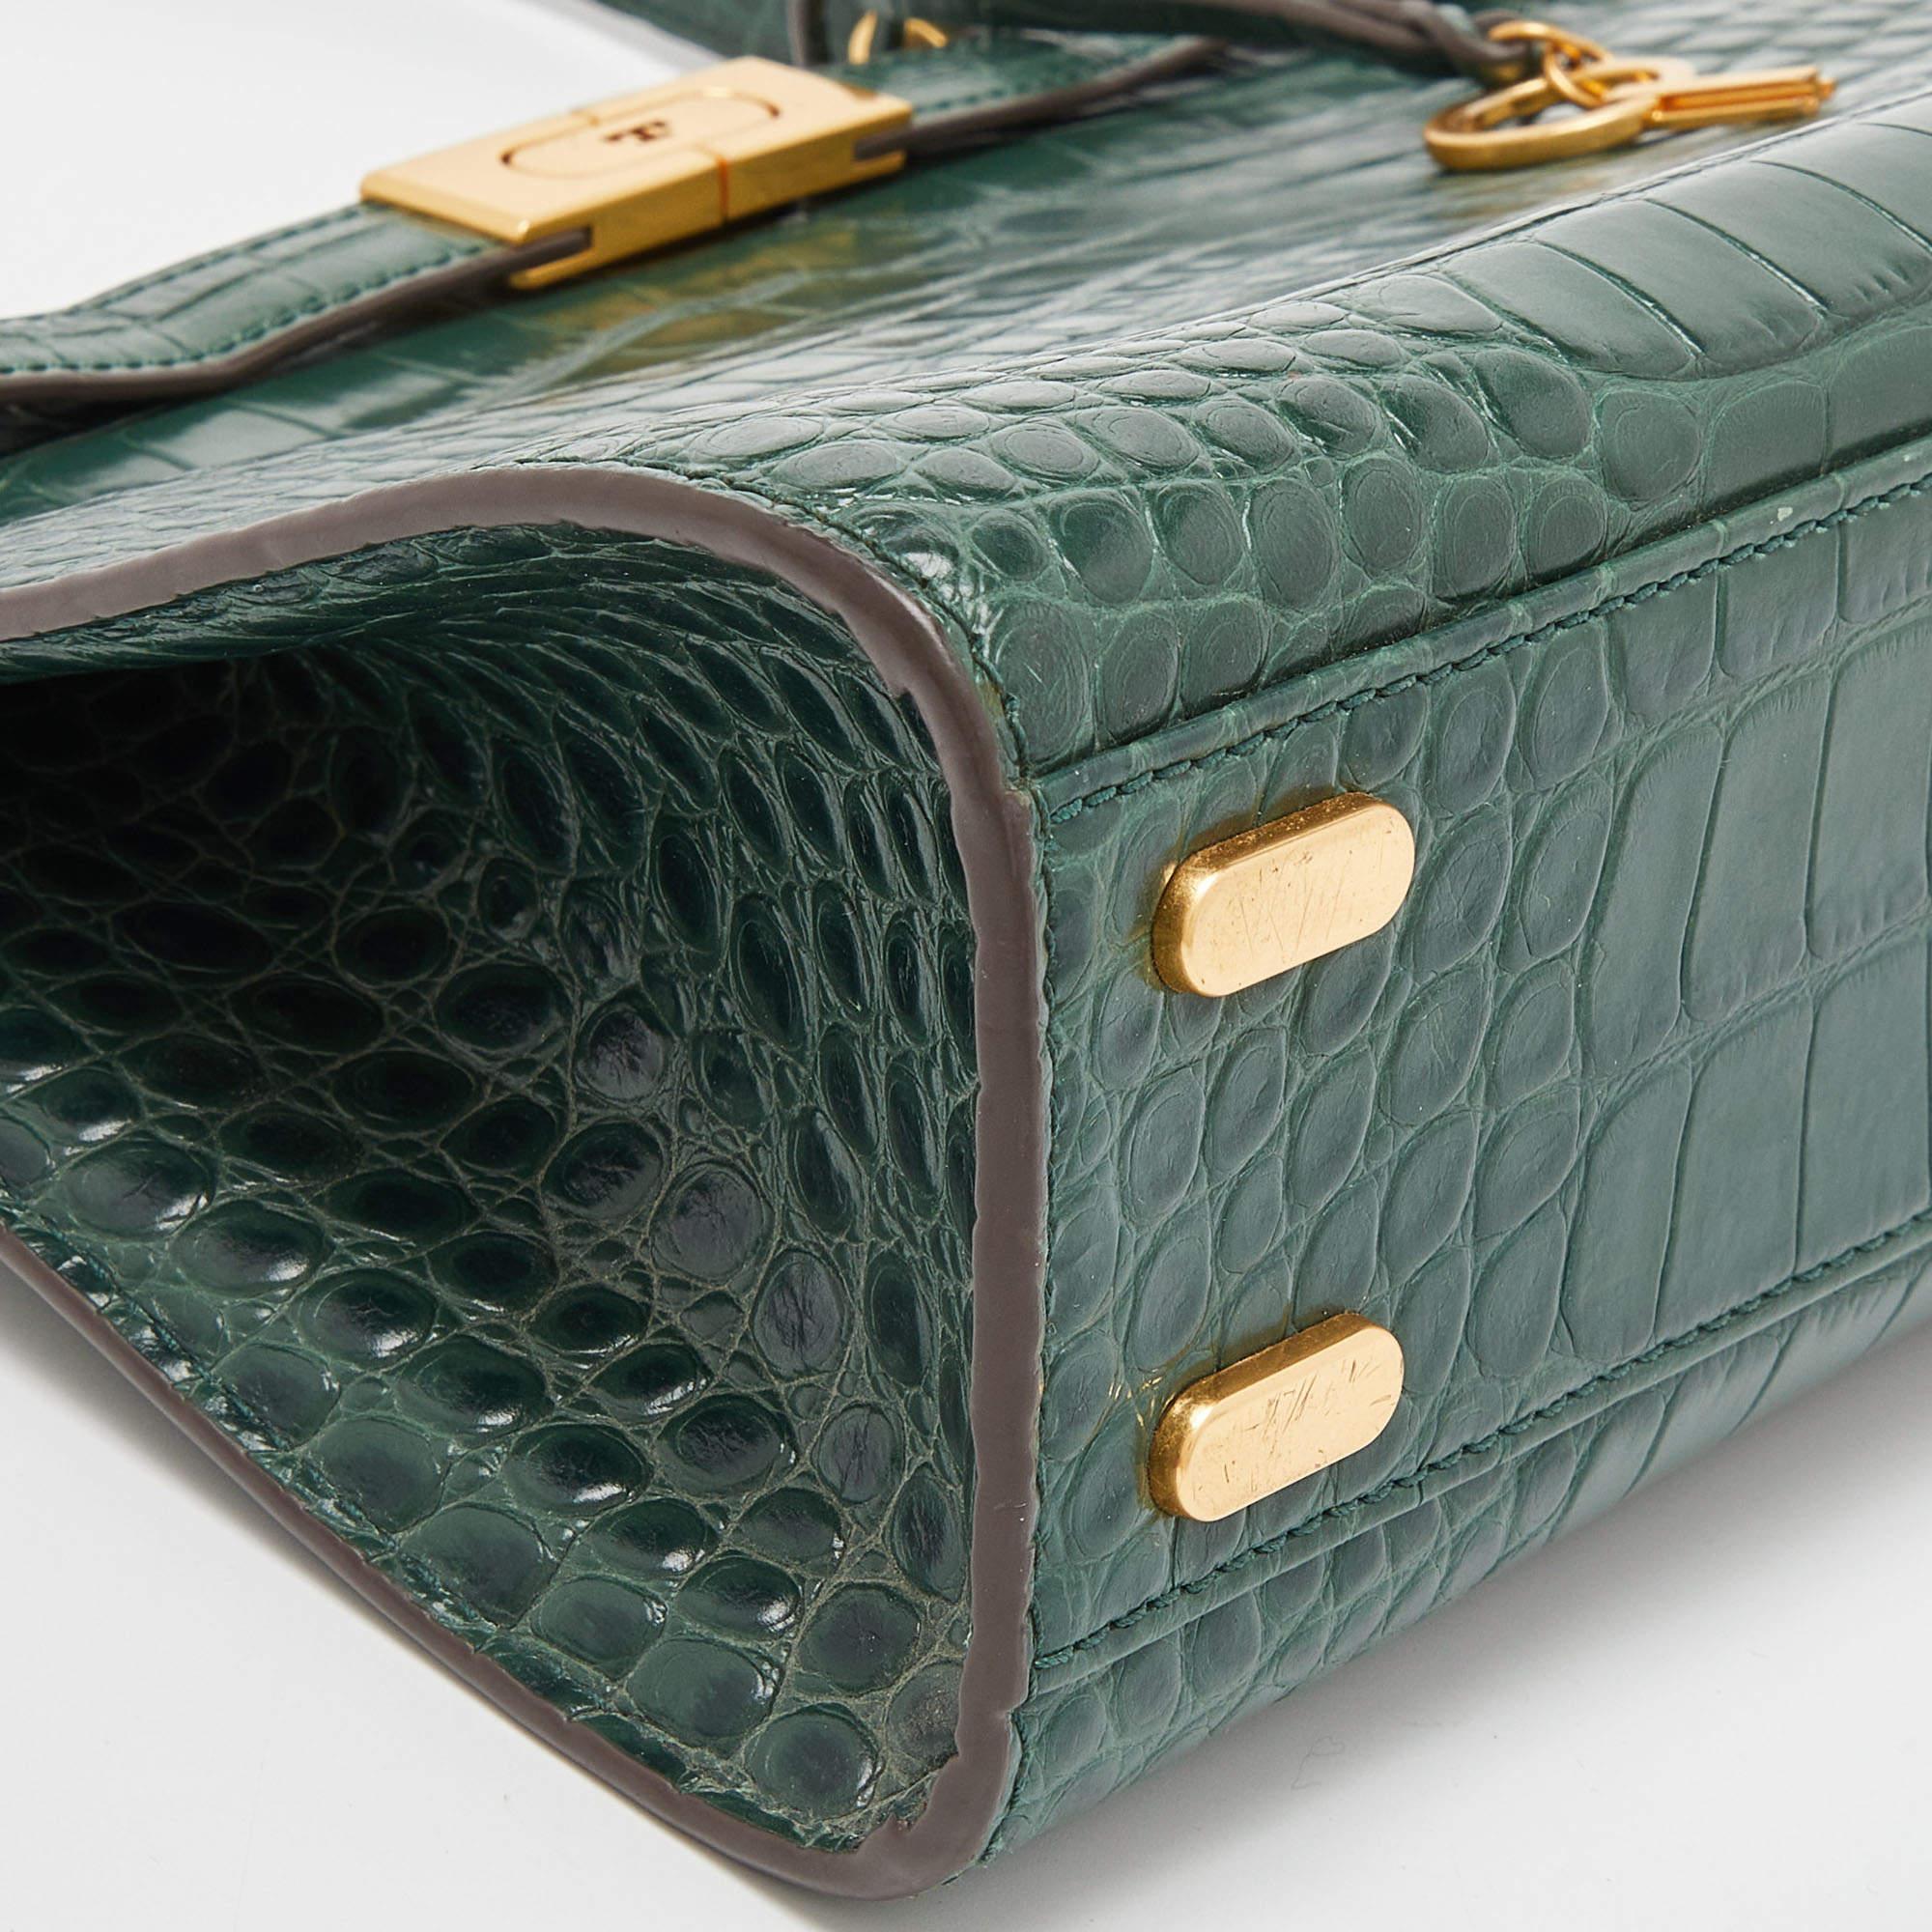 Tory Burch Green Croc Embossed Leather Lee Radziwill Top Handle Bag 4